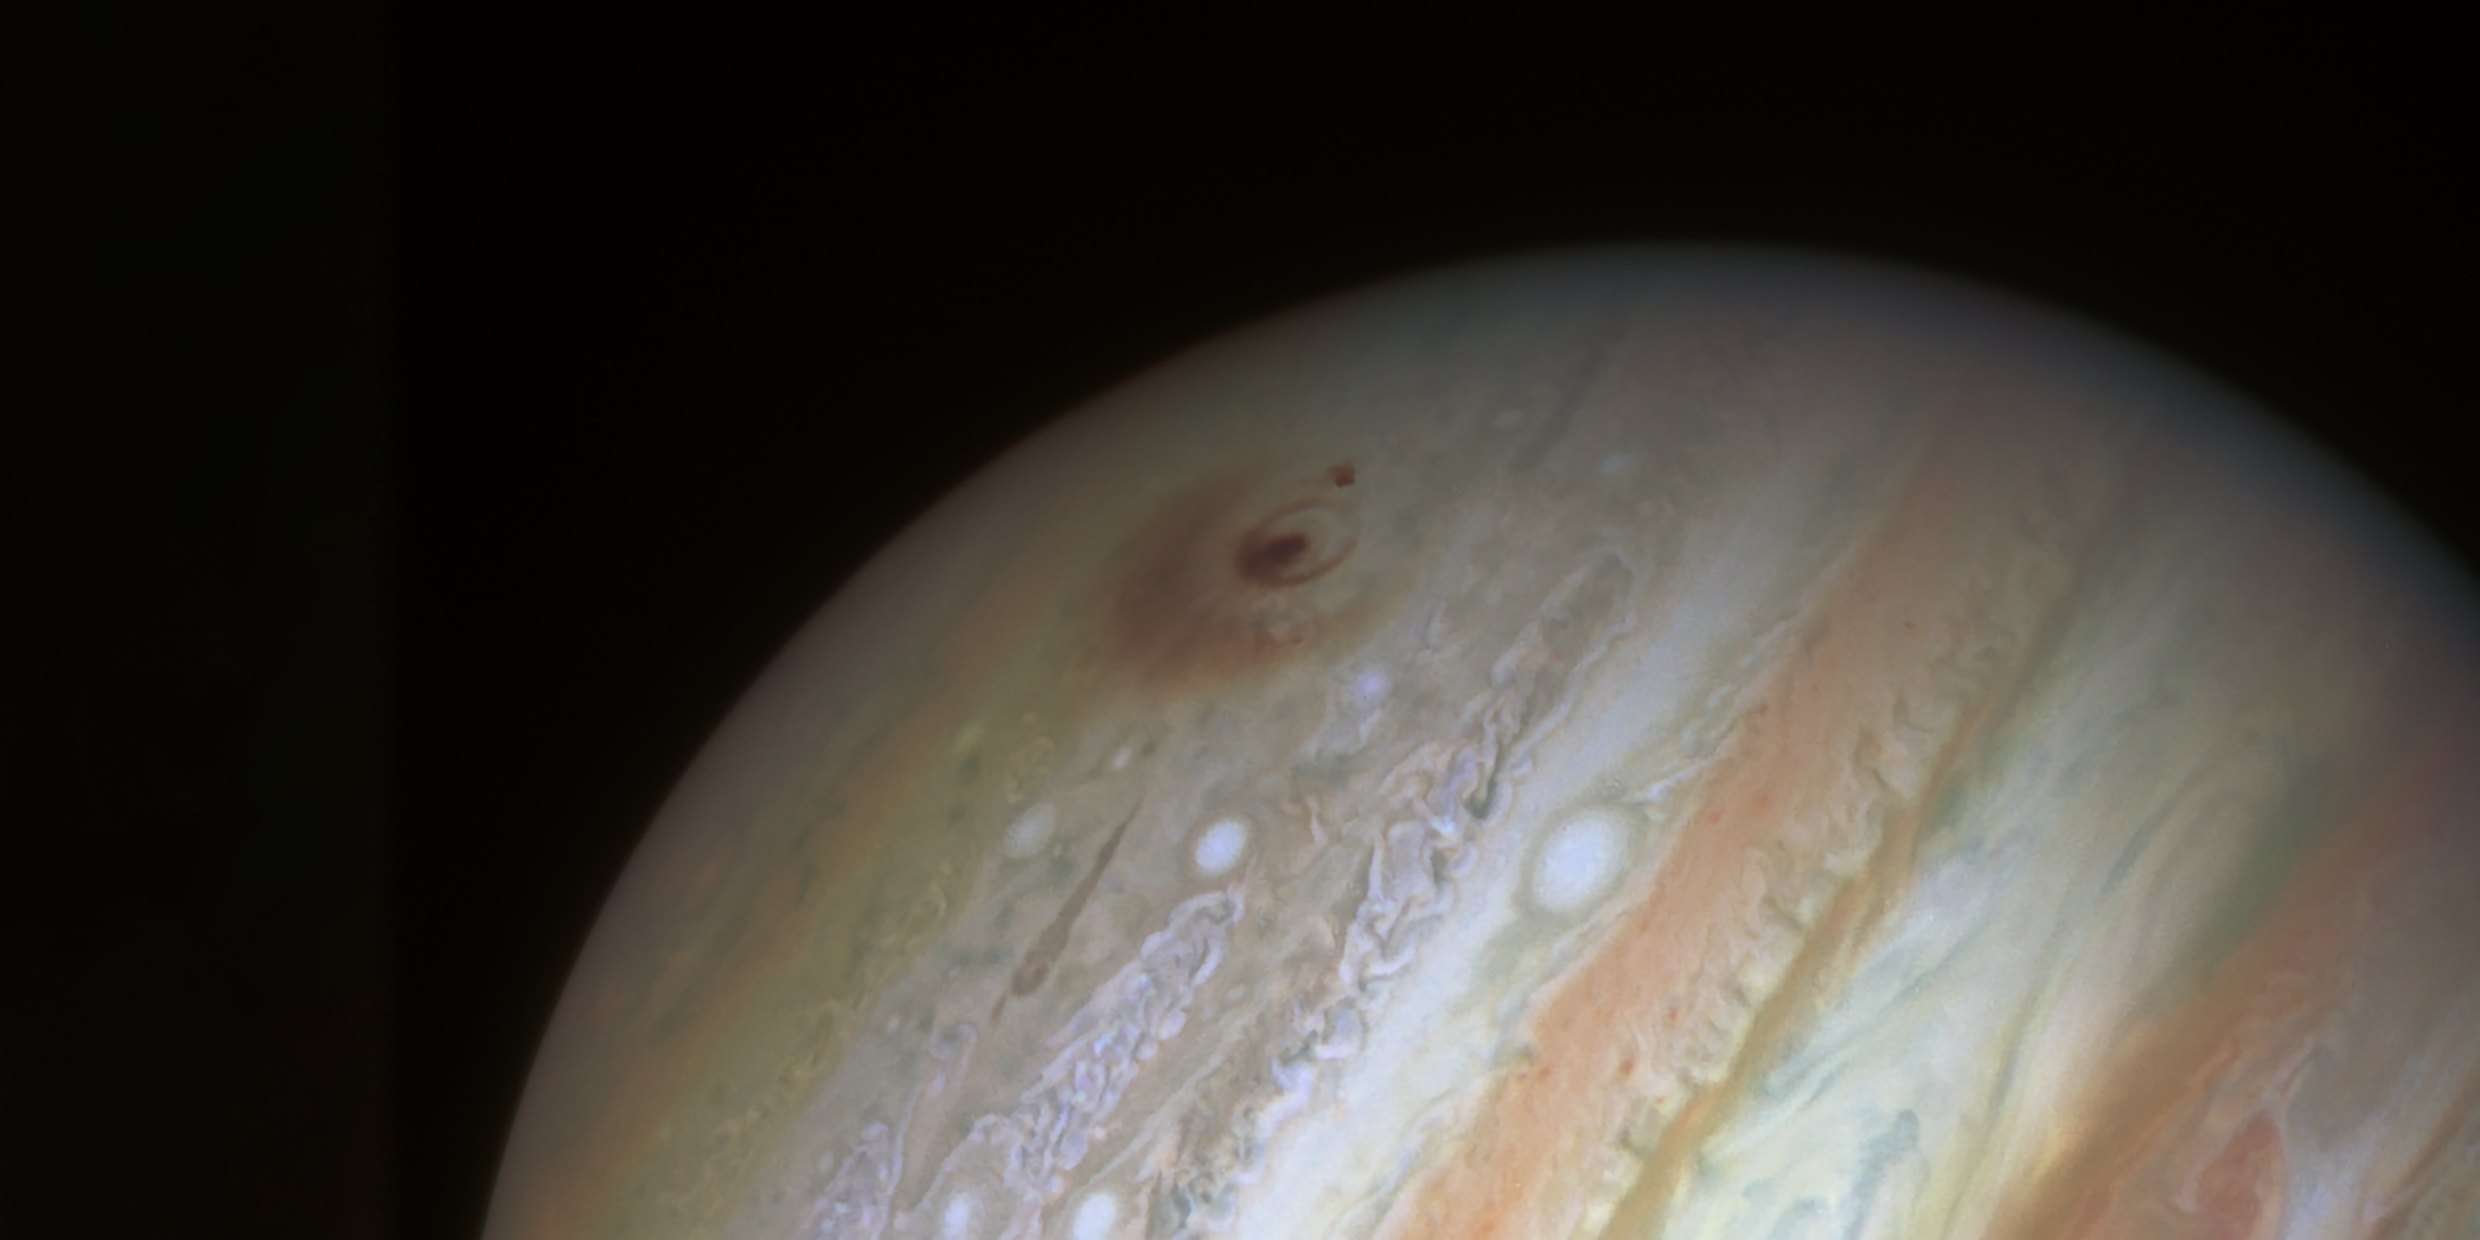 Image of Jupiter with an impact scar